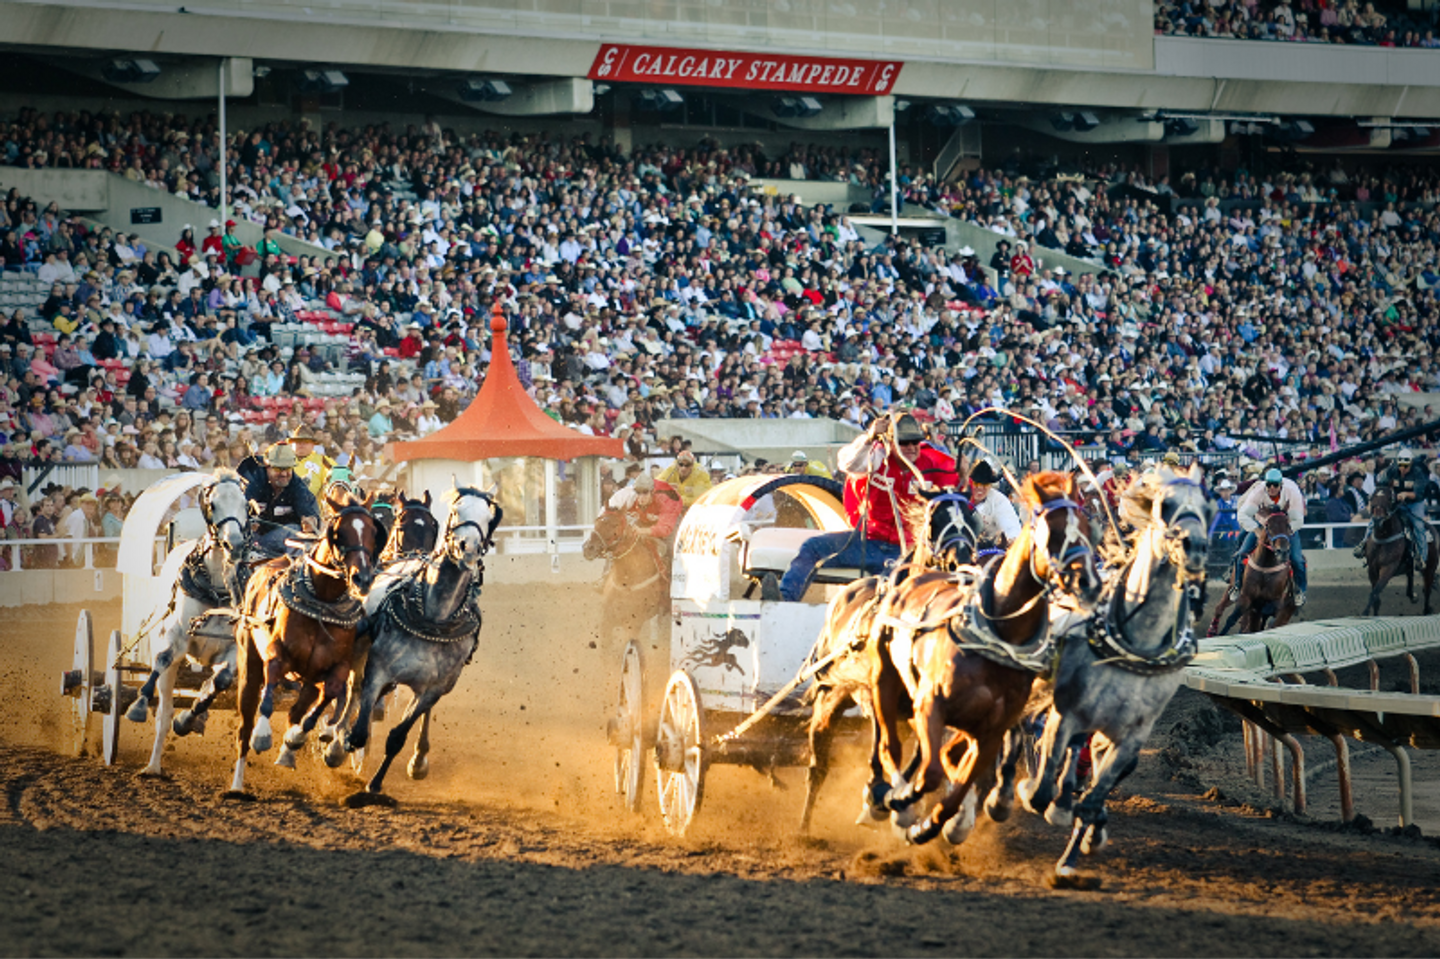 Calgary Stampede Adventure: Canada's Wild West Spectacle